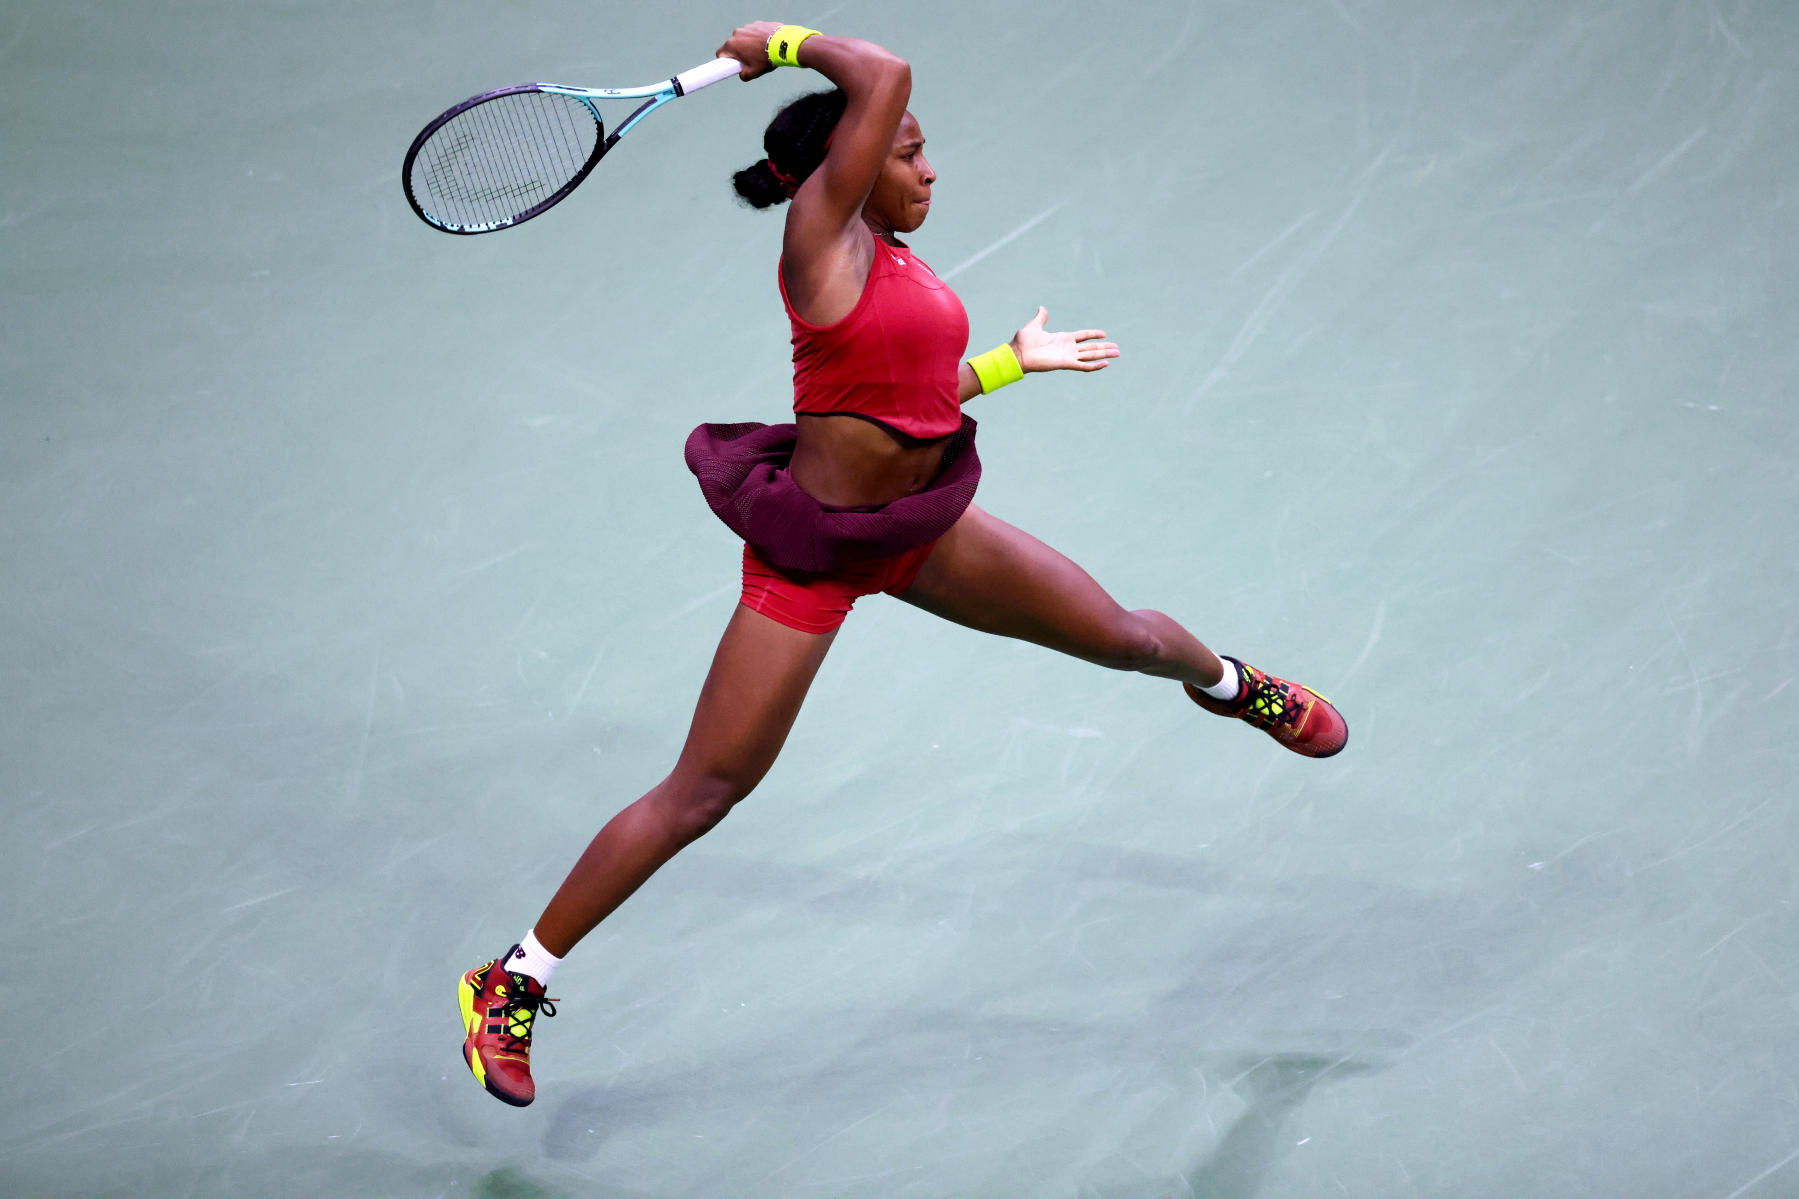 <h4 style="text-transform:uppercase">Coco Gauff, 2023 US Open Women's Final</h4>
<div class="captiontext">
This image of Coco Gauff during the recent 2023 US Open Women's final highlights her intense athleticism as well as a creativity which allowed her to capture the year's US Open title and her first, though most certainly not last, Grand Slam title.  It was hard not to feel the ushering in of a new era and generation with her victory, and the slow and steady approach to building her game and more importantly, her development as a whole person since she arrived on the seen at age 14 five years ago, is clearly starting to pay dividends.  
</div> : Limited Editions : Photography by Adam Stoltman: Sports Photography, The Arts, Portraiture, Travel, Photojournalism and Fine Art in New York